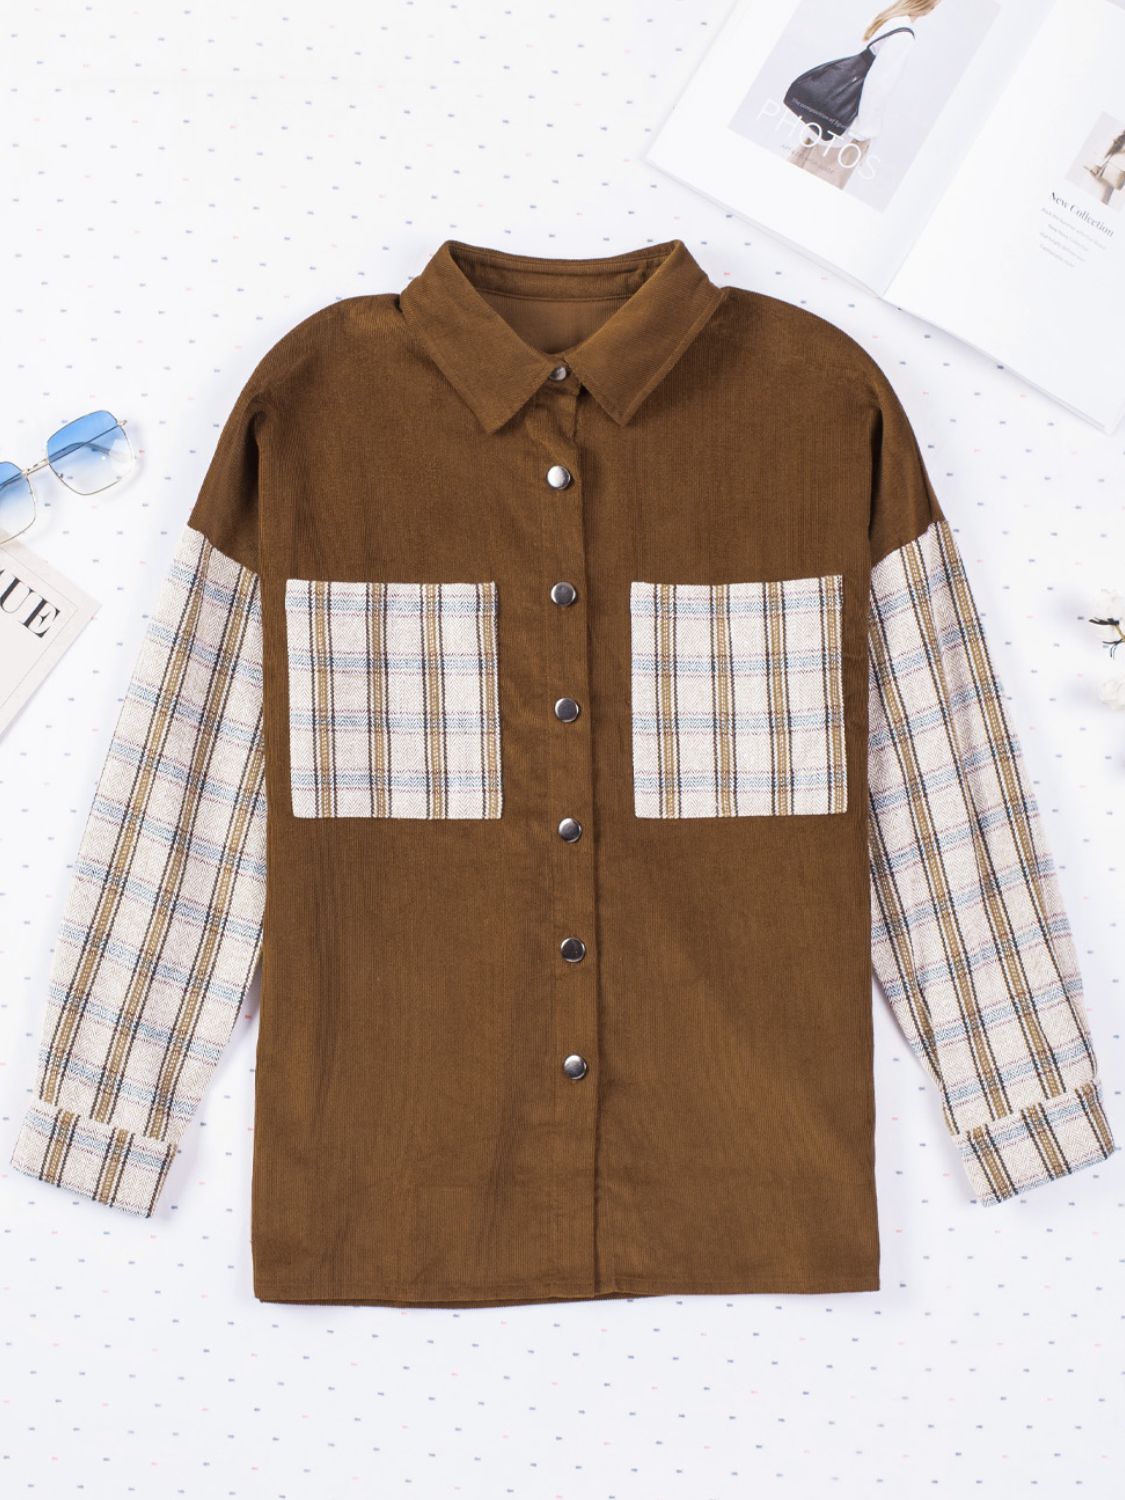 Plaid Corduroy Shirt Jacket with Pockets - Brown / S Apparel & Accessories Wynter 4 All Seasons